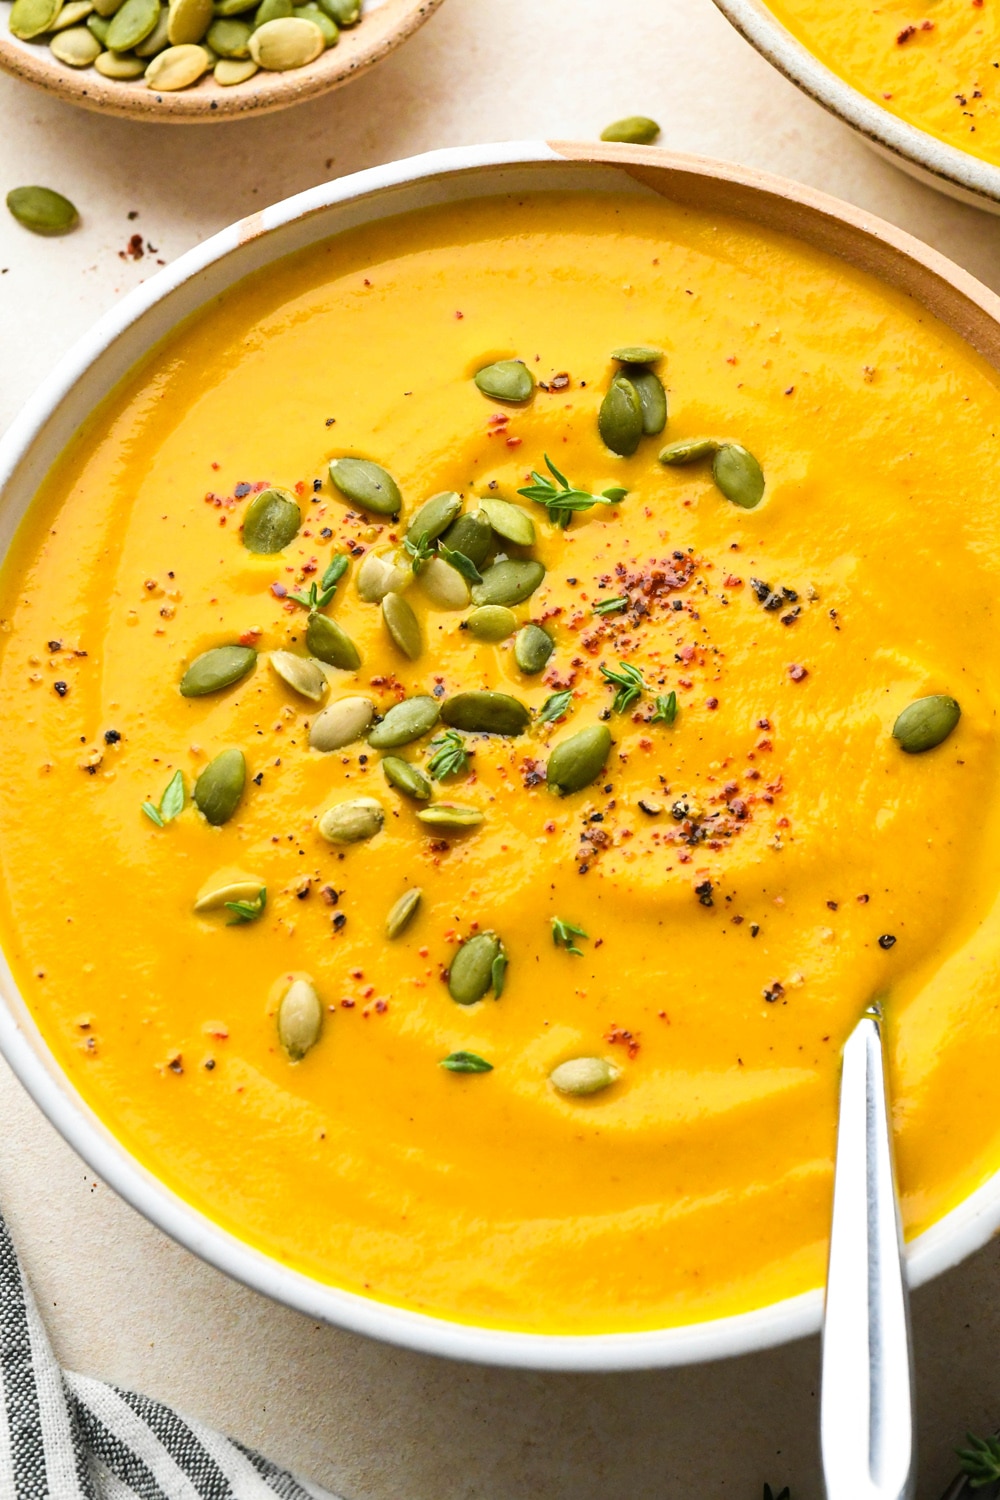 Bright orange dairy free pumpkin and carrot soup in a large soup bowl, garnished with pumpkin seeds, chili flakes, black pepper, and fresh thyme.